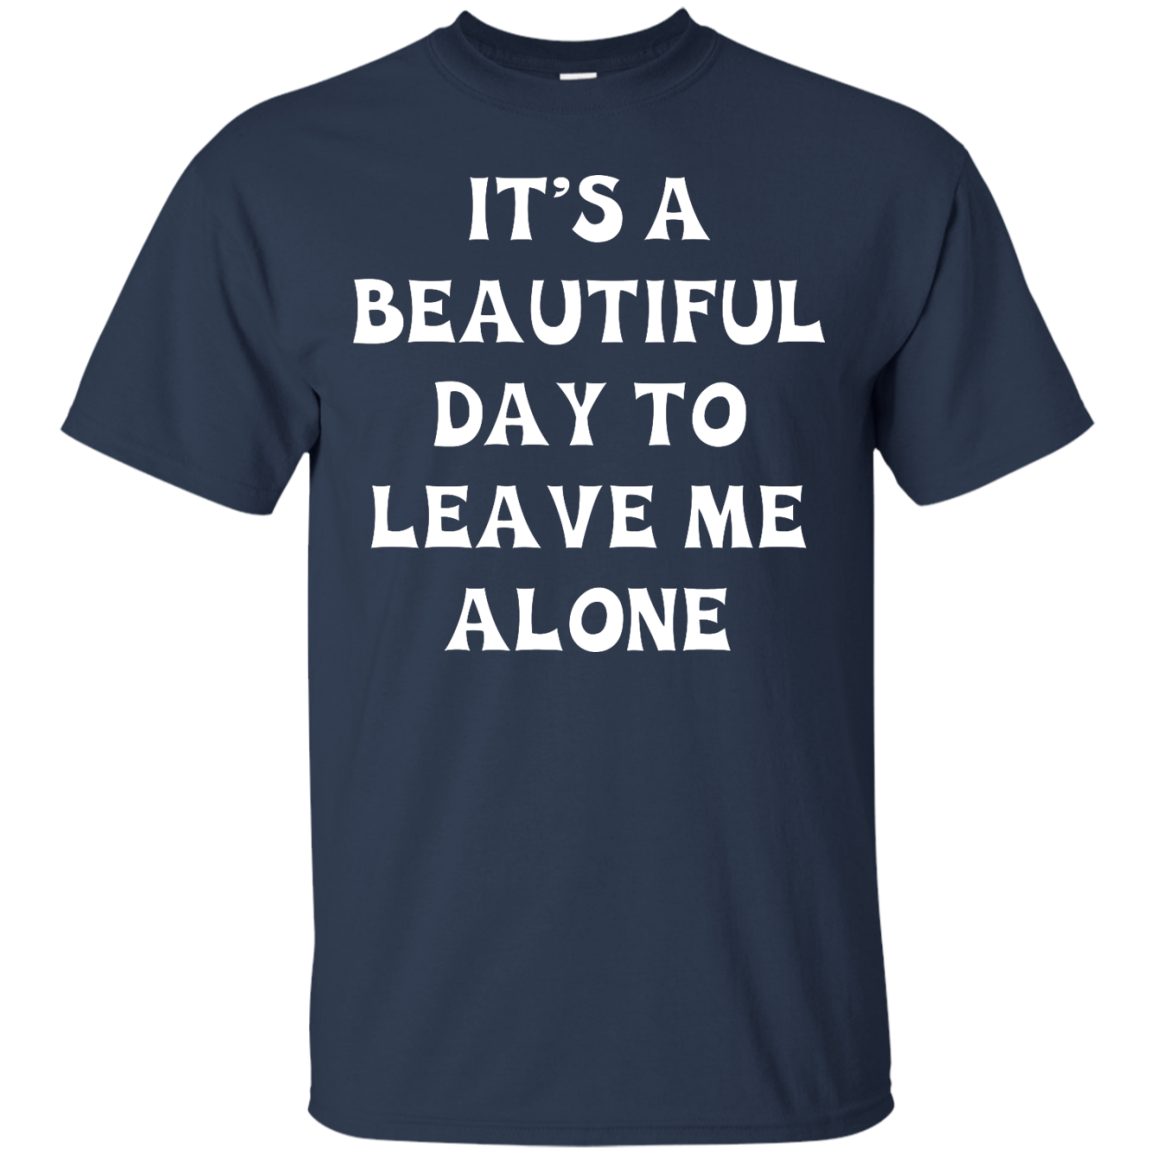 It's A Beautiful Day To Leave Me Alone shirt, tank, sweater